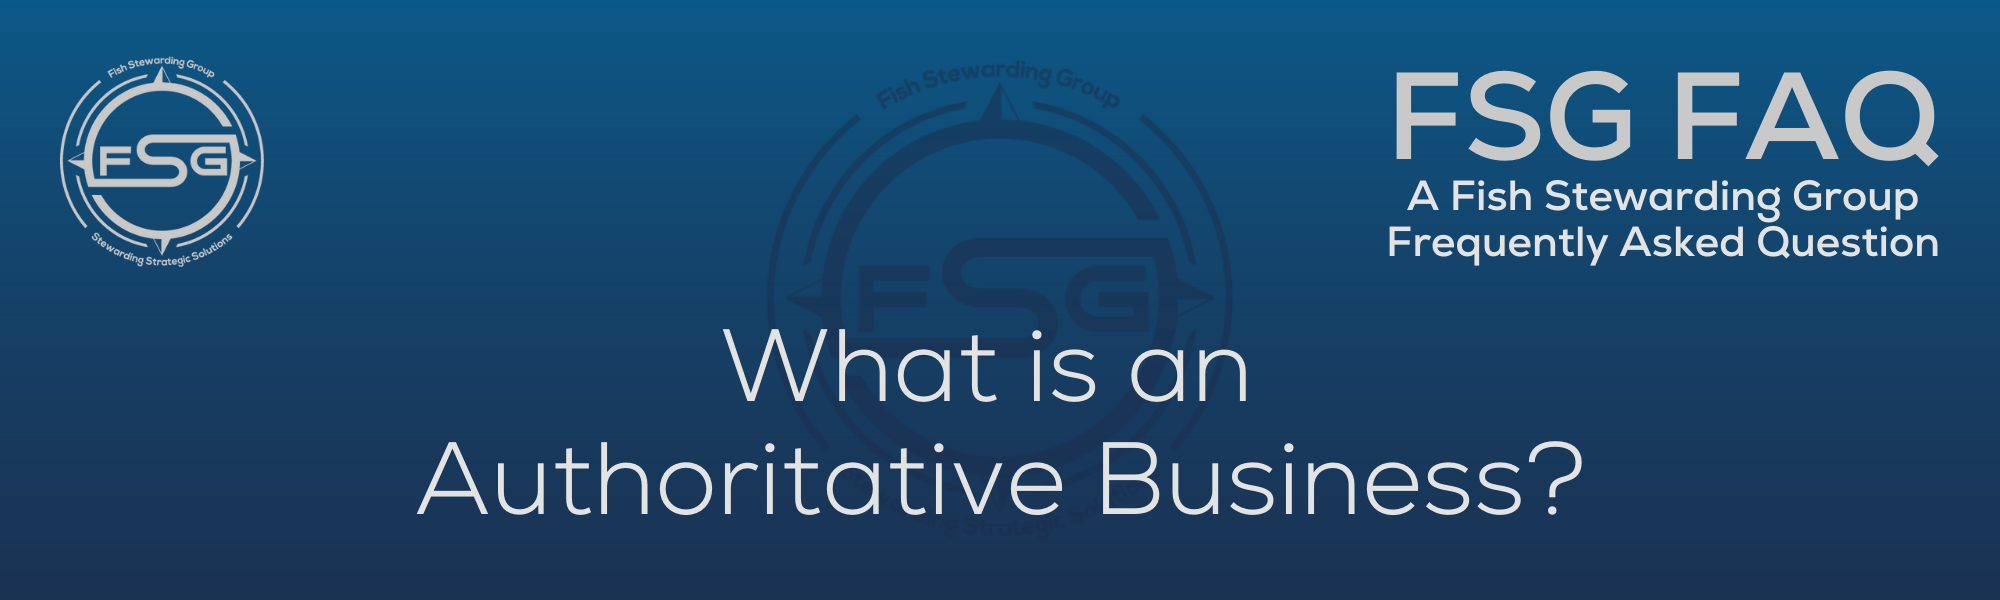 A rectangular and long thing Footer FAQ Image on the bottom of the What is an Authoritative Business? Page on the website. The background is a blue gradient color that goes from a dark blue on the bottom to a lighter blue on top. The text in lower center of the image in a light gray text that reads: What is an Authoritative Business? The text in gray in the upper right corner reads: FSG FAQ. Right beneath that is more gray text in a smaller font that reads: A Fish Stewarding Group Frequently Asked Question. On the upper left side is the FSG Logo in gray. The logo has the letters FSG in the middle with a circle with four pointed arrows facing north, south, east and west with the S connected to that circle. Four rounded lines make the next circle of the circle and the last layer is a thin circle with the text on the Bottom that reads Stewarding Strategist Solutions and on top, the text reads Fish Stewarding Group. And Lastly in the center background of the image is a watermarked FSG logo, faded in blue, in the background.